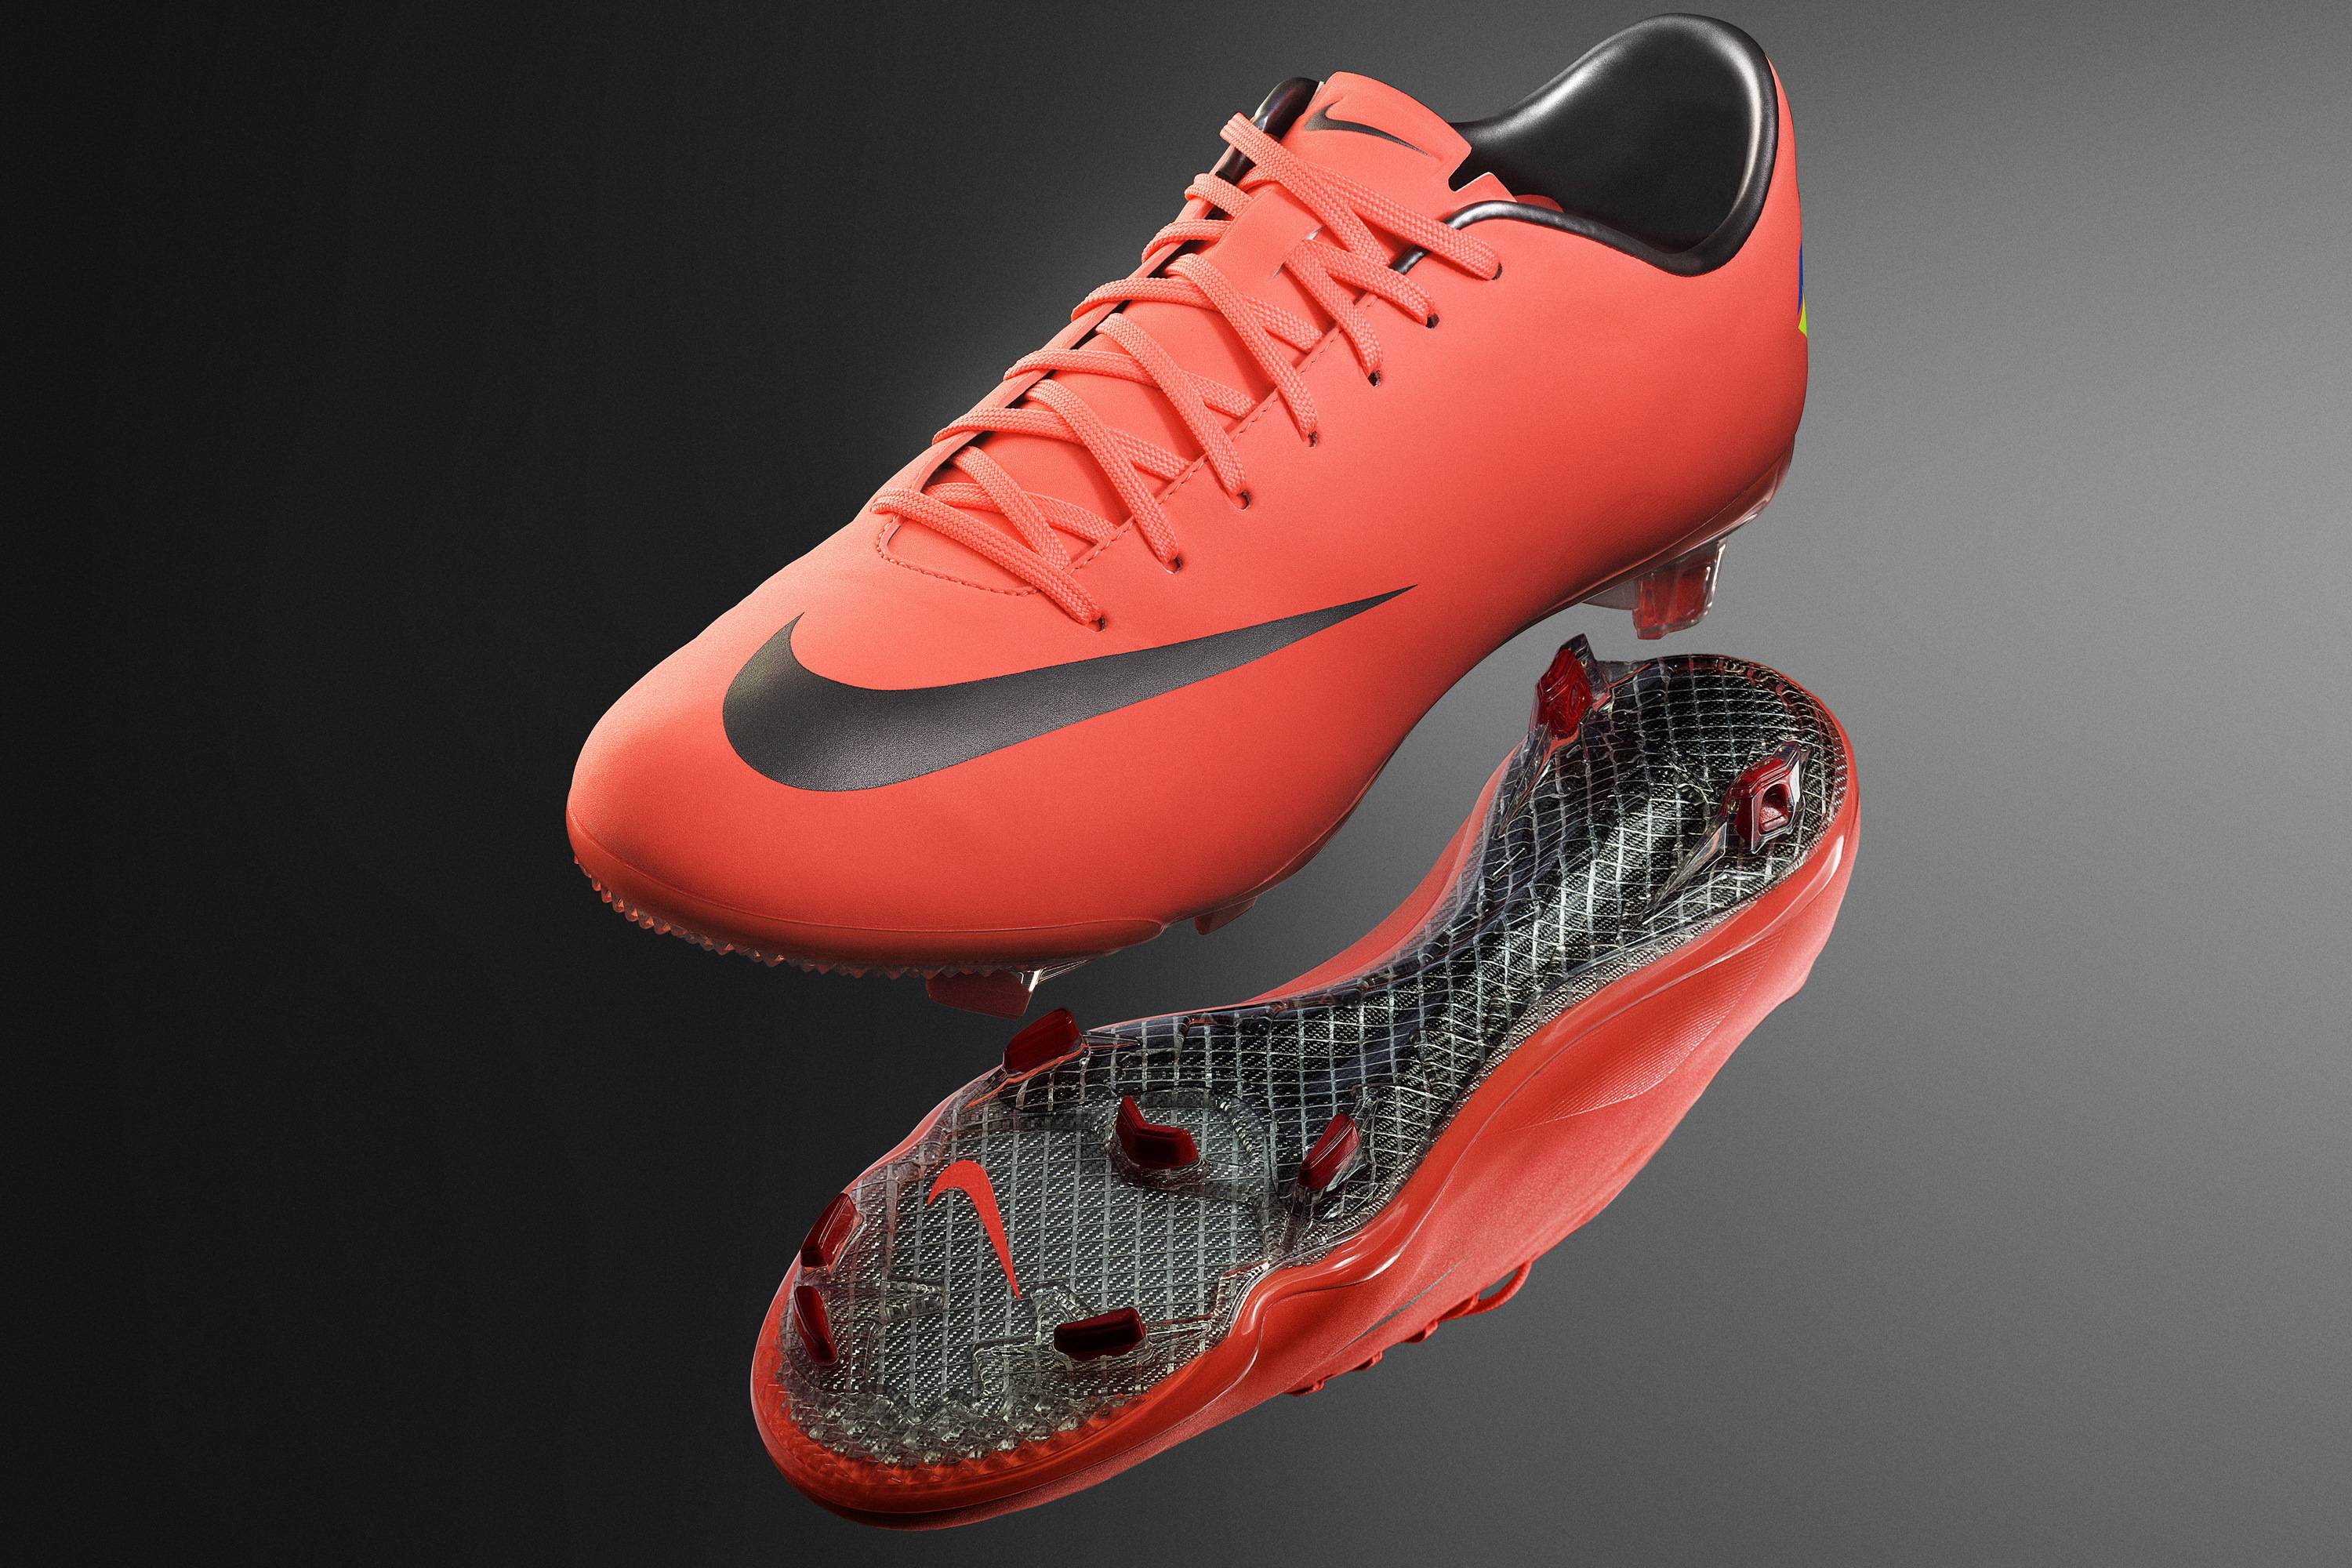 Wallpapers nike mercurial, football boots, football, soccer